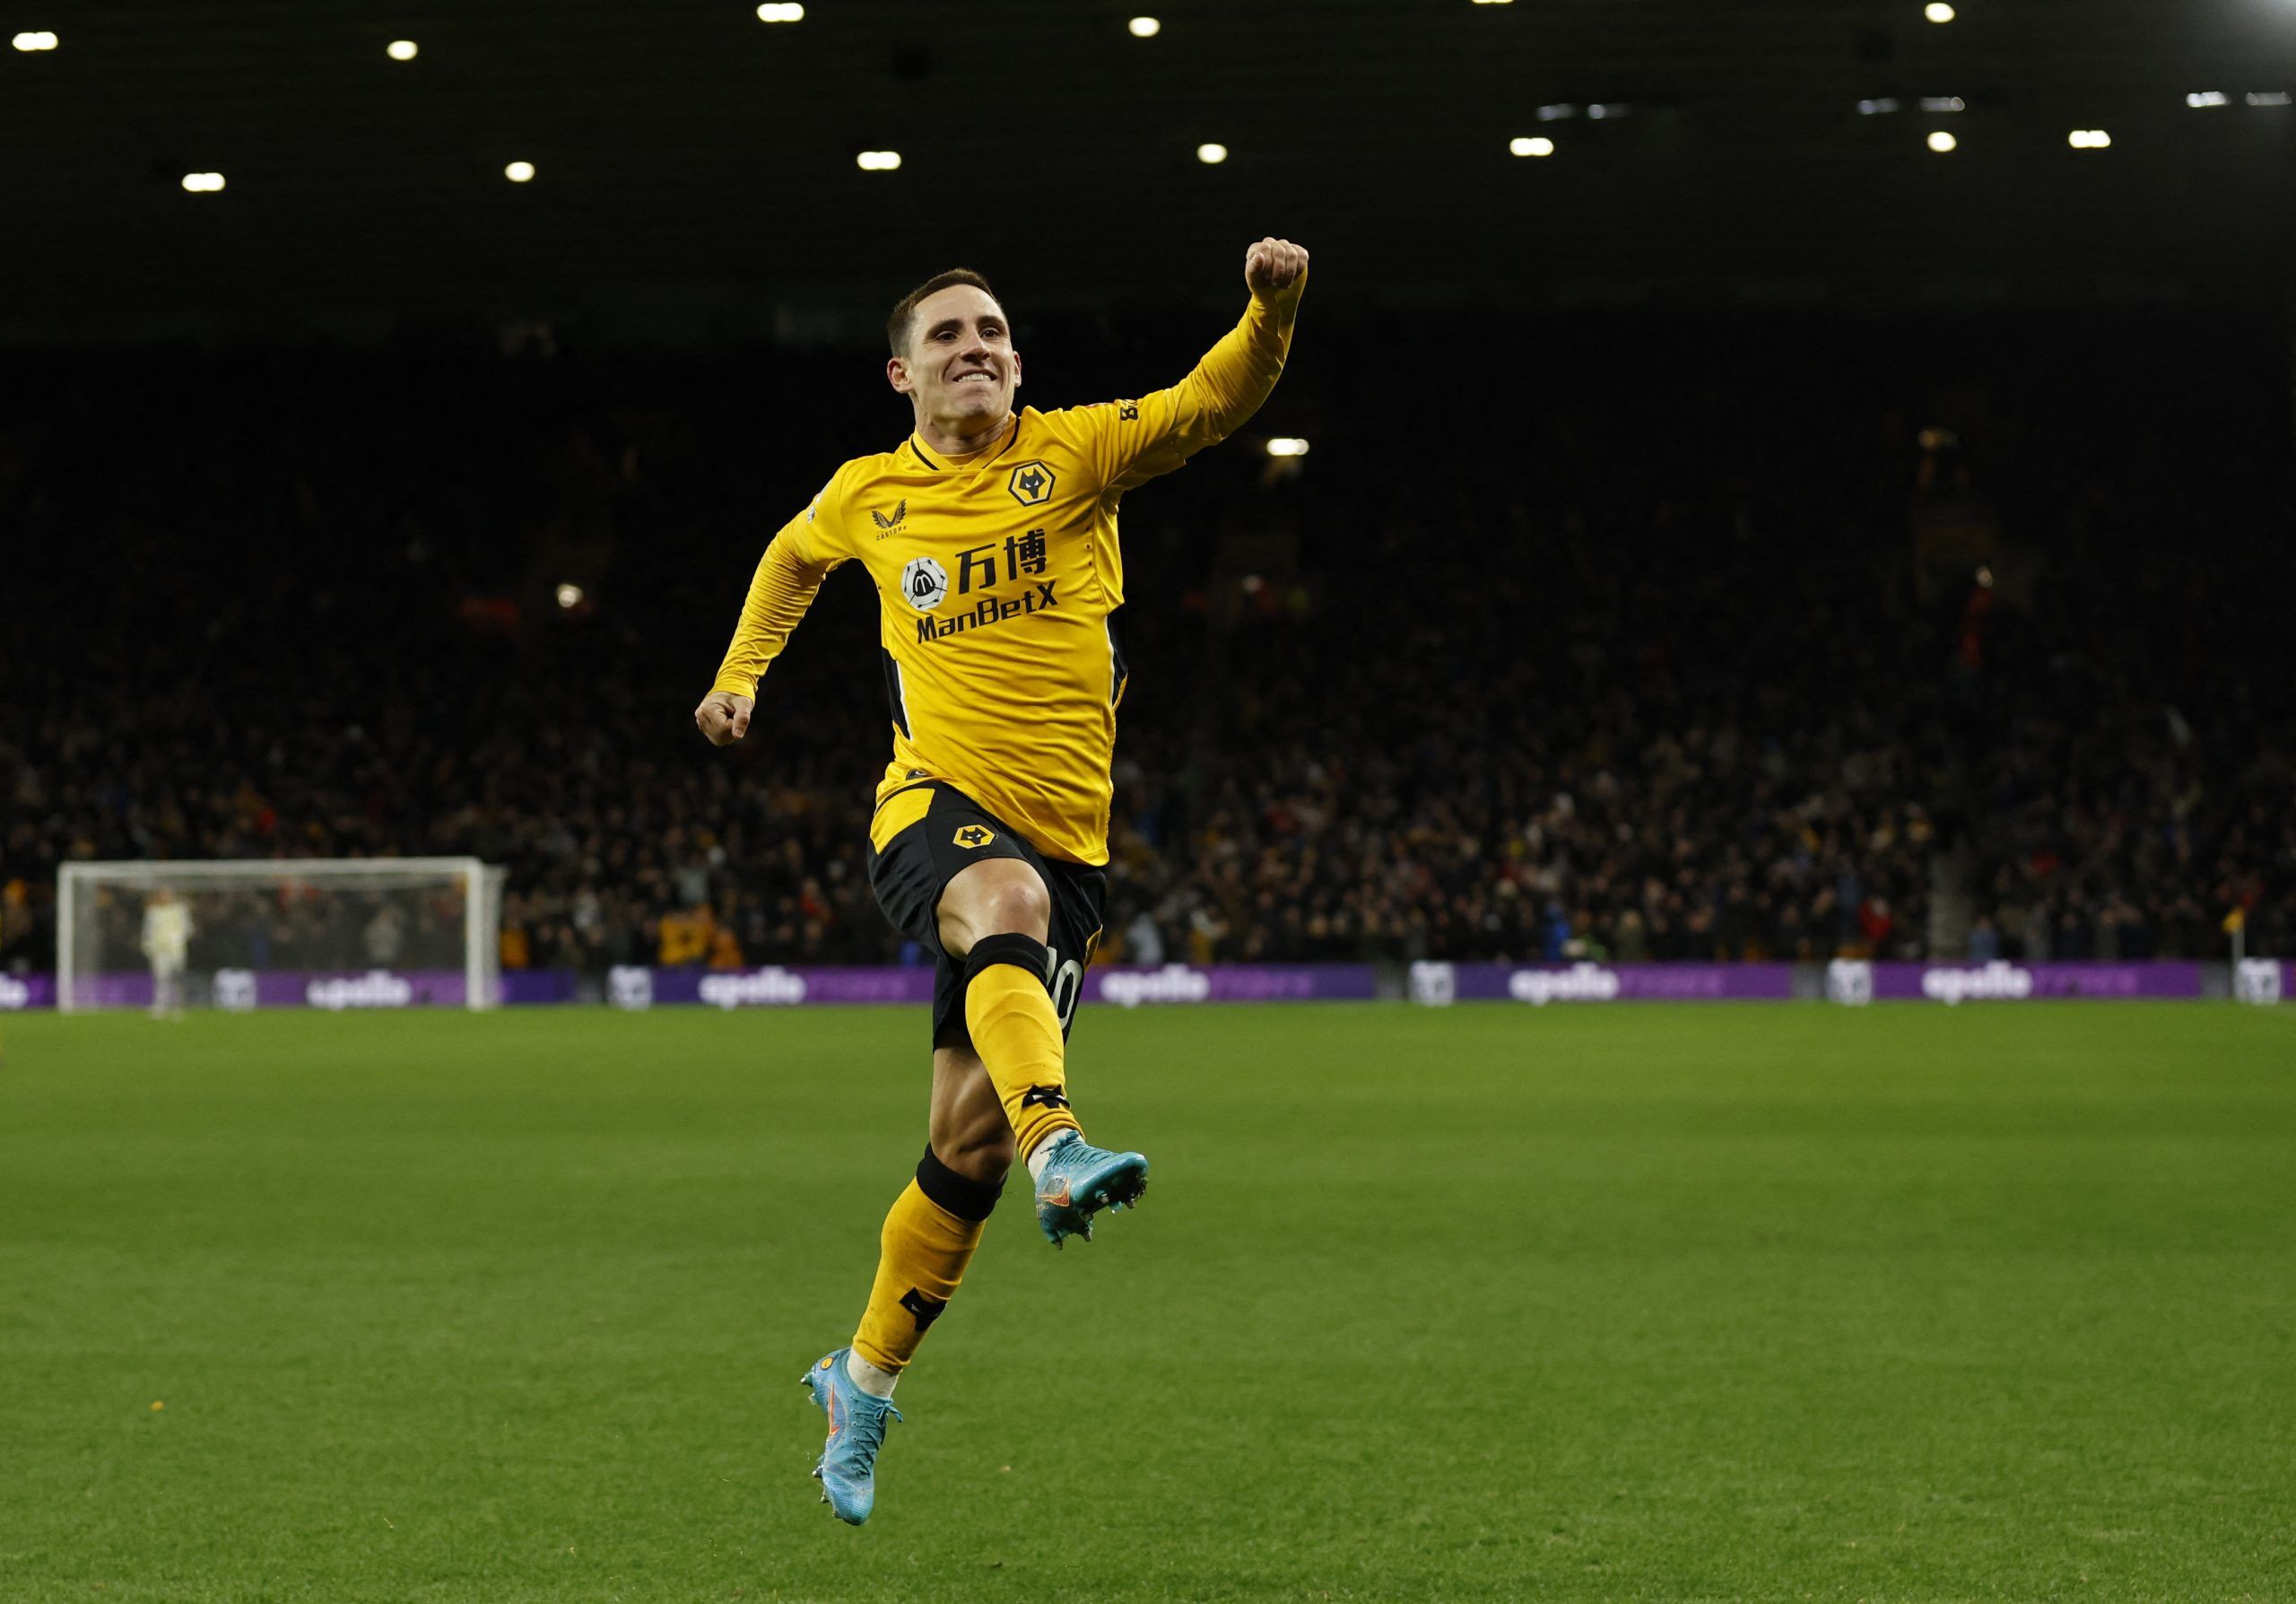 Bruno Lage, Fosun, Jeff Shi, Molineux, The Old Gold, Wolves, Wolves fans, Wolves info, Wolves latest, Wolves news, Wolves updates, WWFC, WWFC news, WWFC update, Premier League, Premier League news, Wolverhampton Wanderers, Crystal Palace, Chalkboard, Daniel Podence, 
